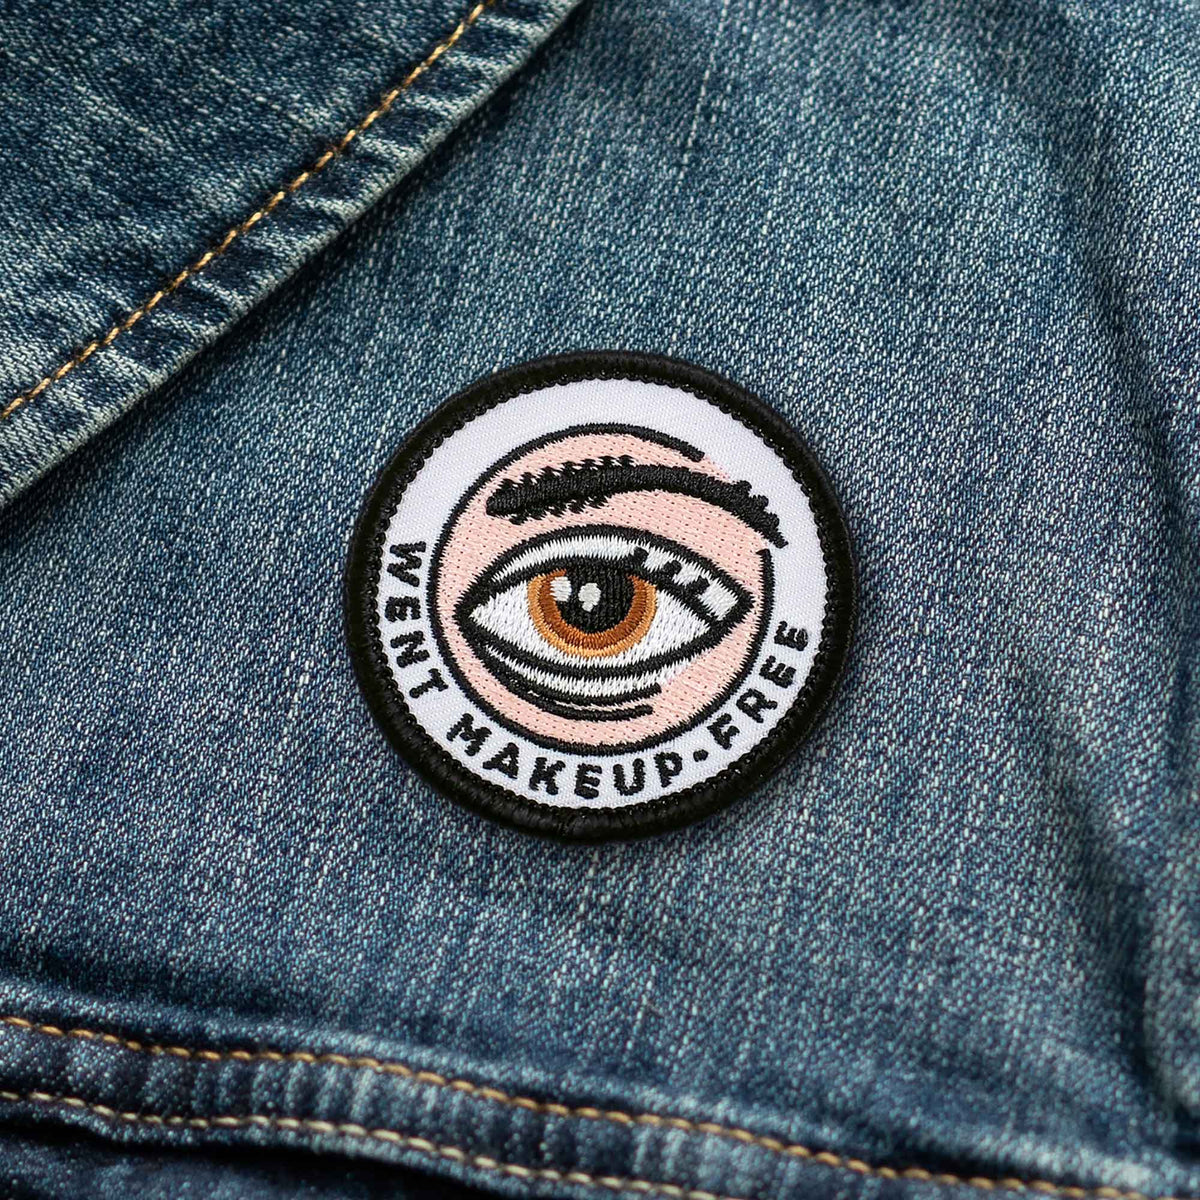 Went Makeup-Free individual adulting merit badge patch for adults on denim jacket